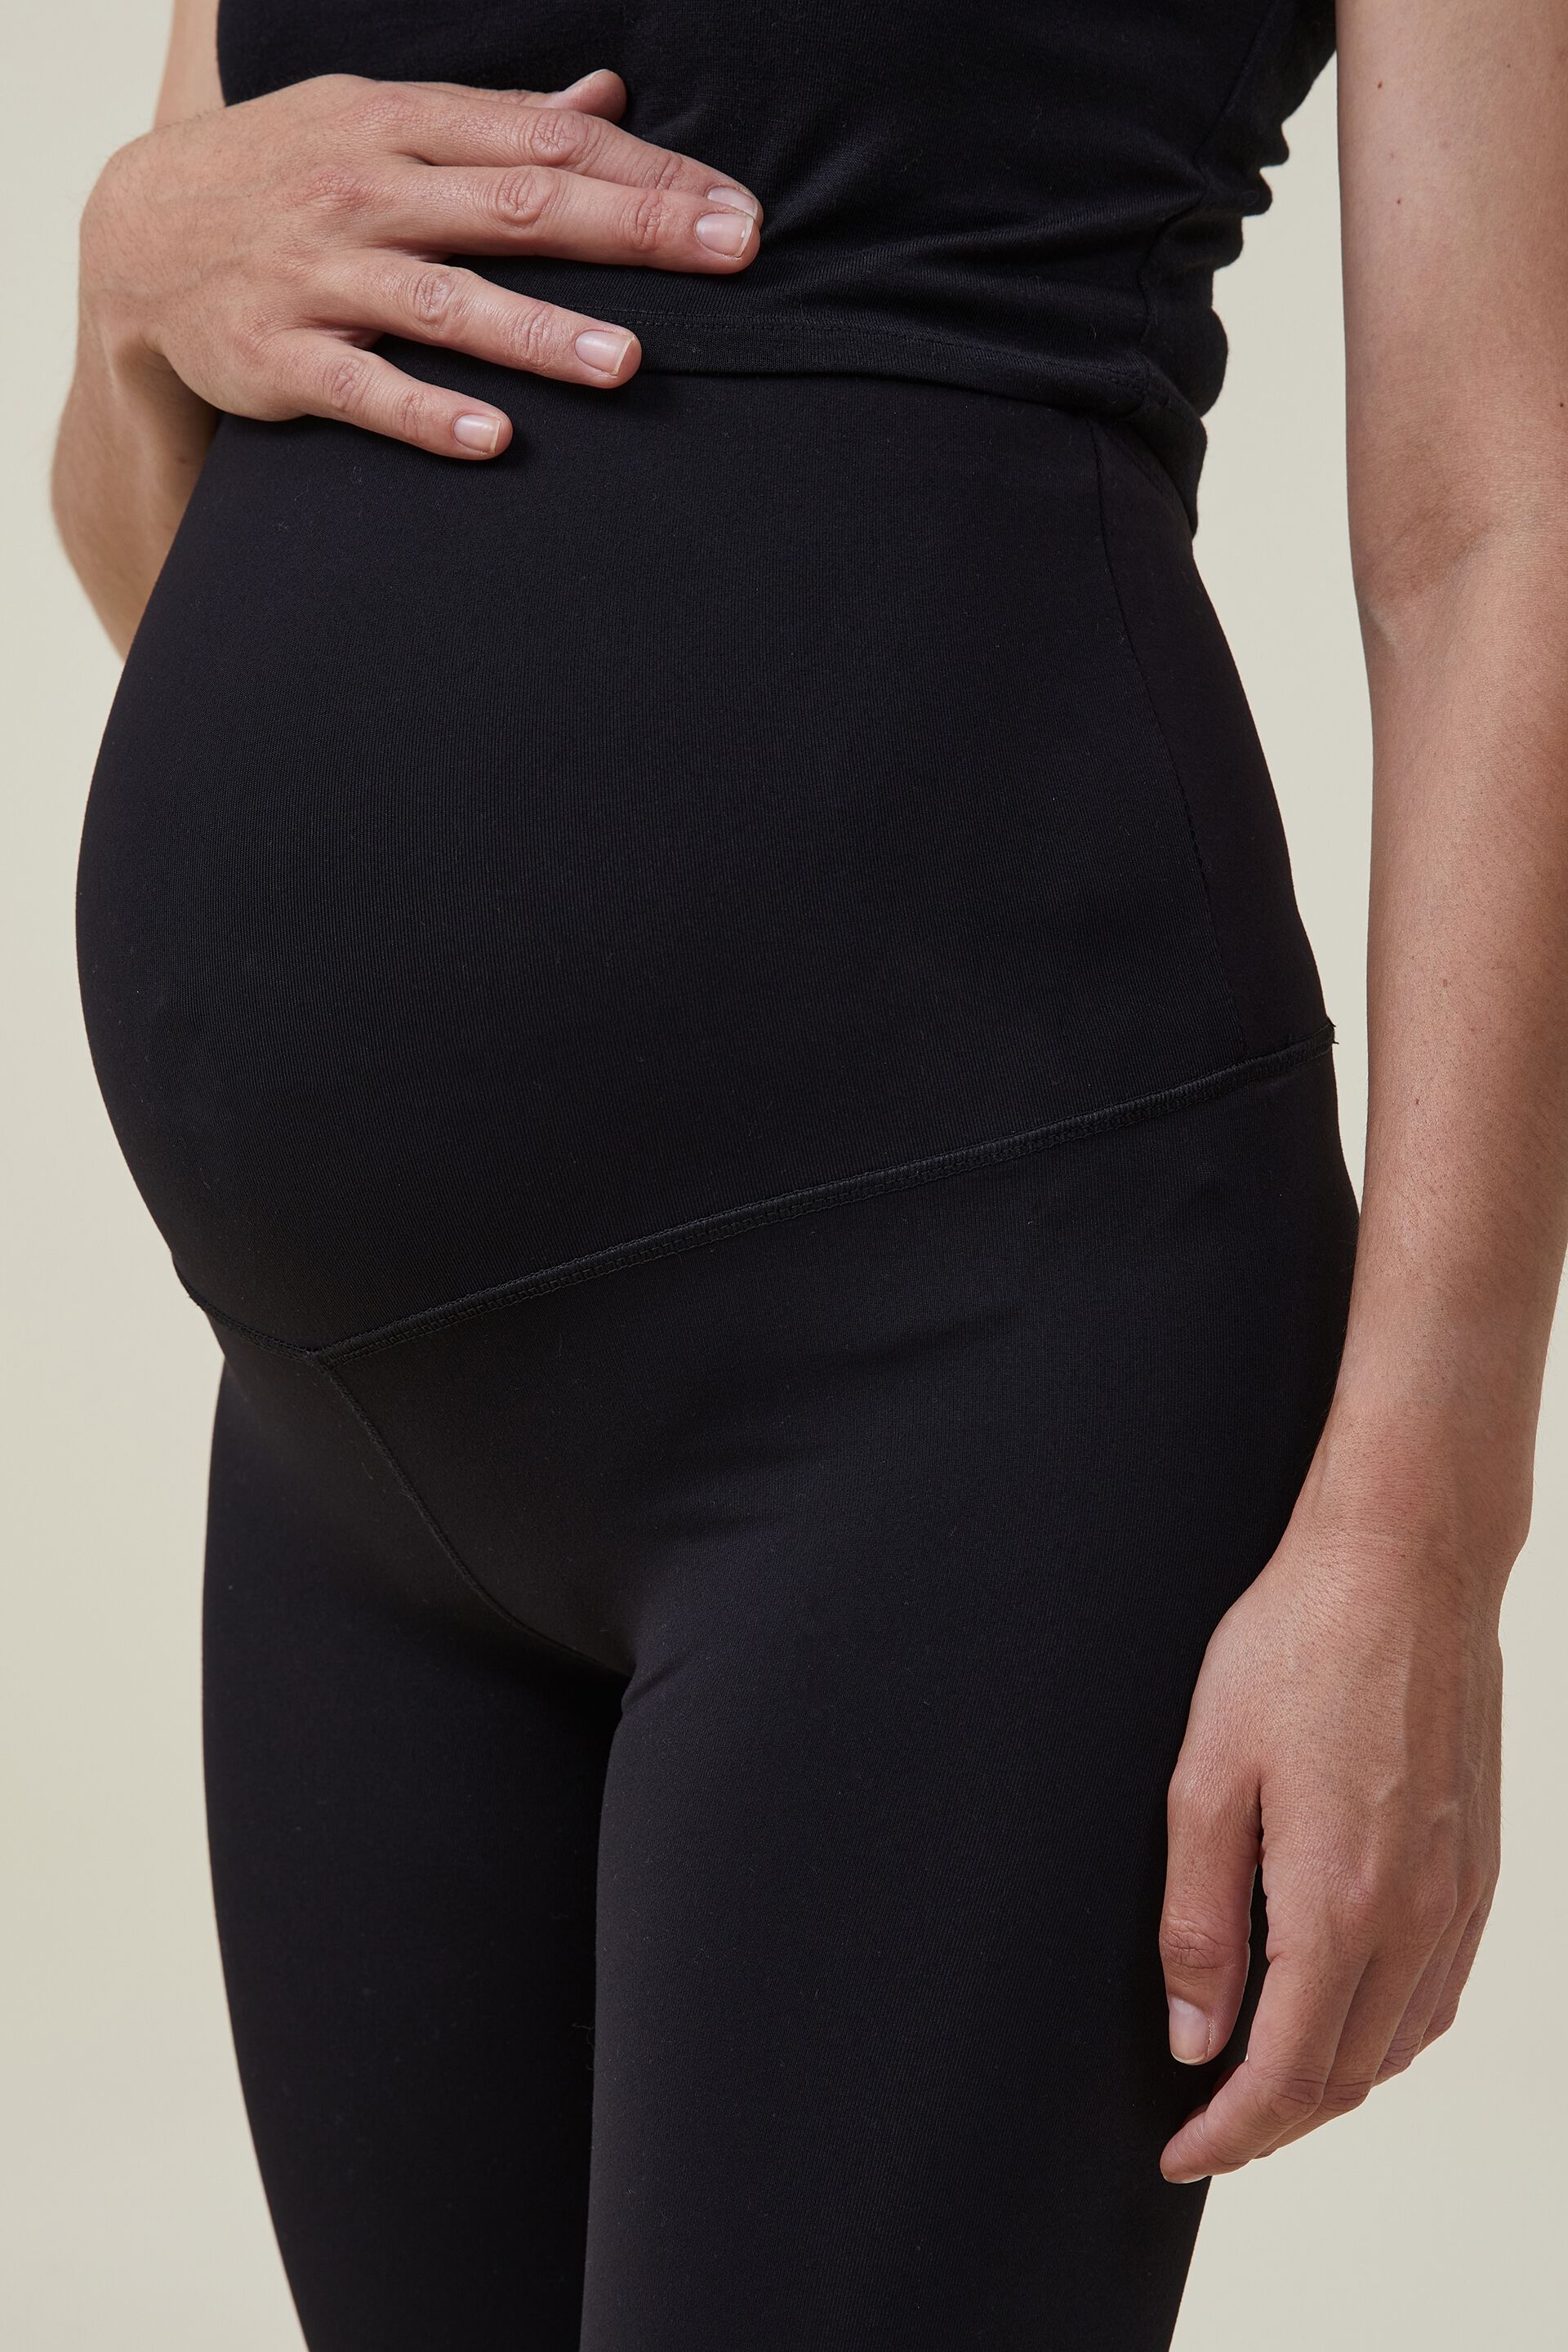 Is it possible to have stillbirth at 25 weeks cause of wearing a super tight  leggings? - Quora